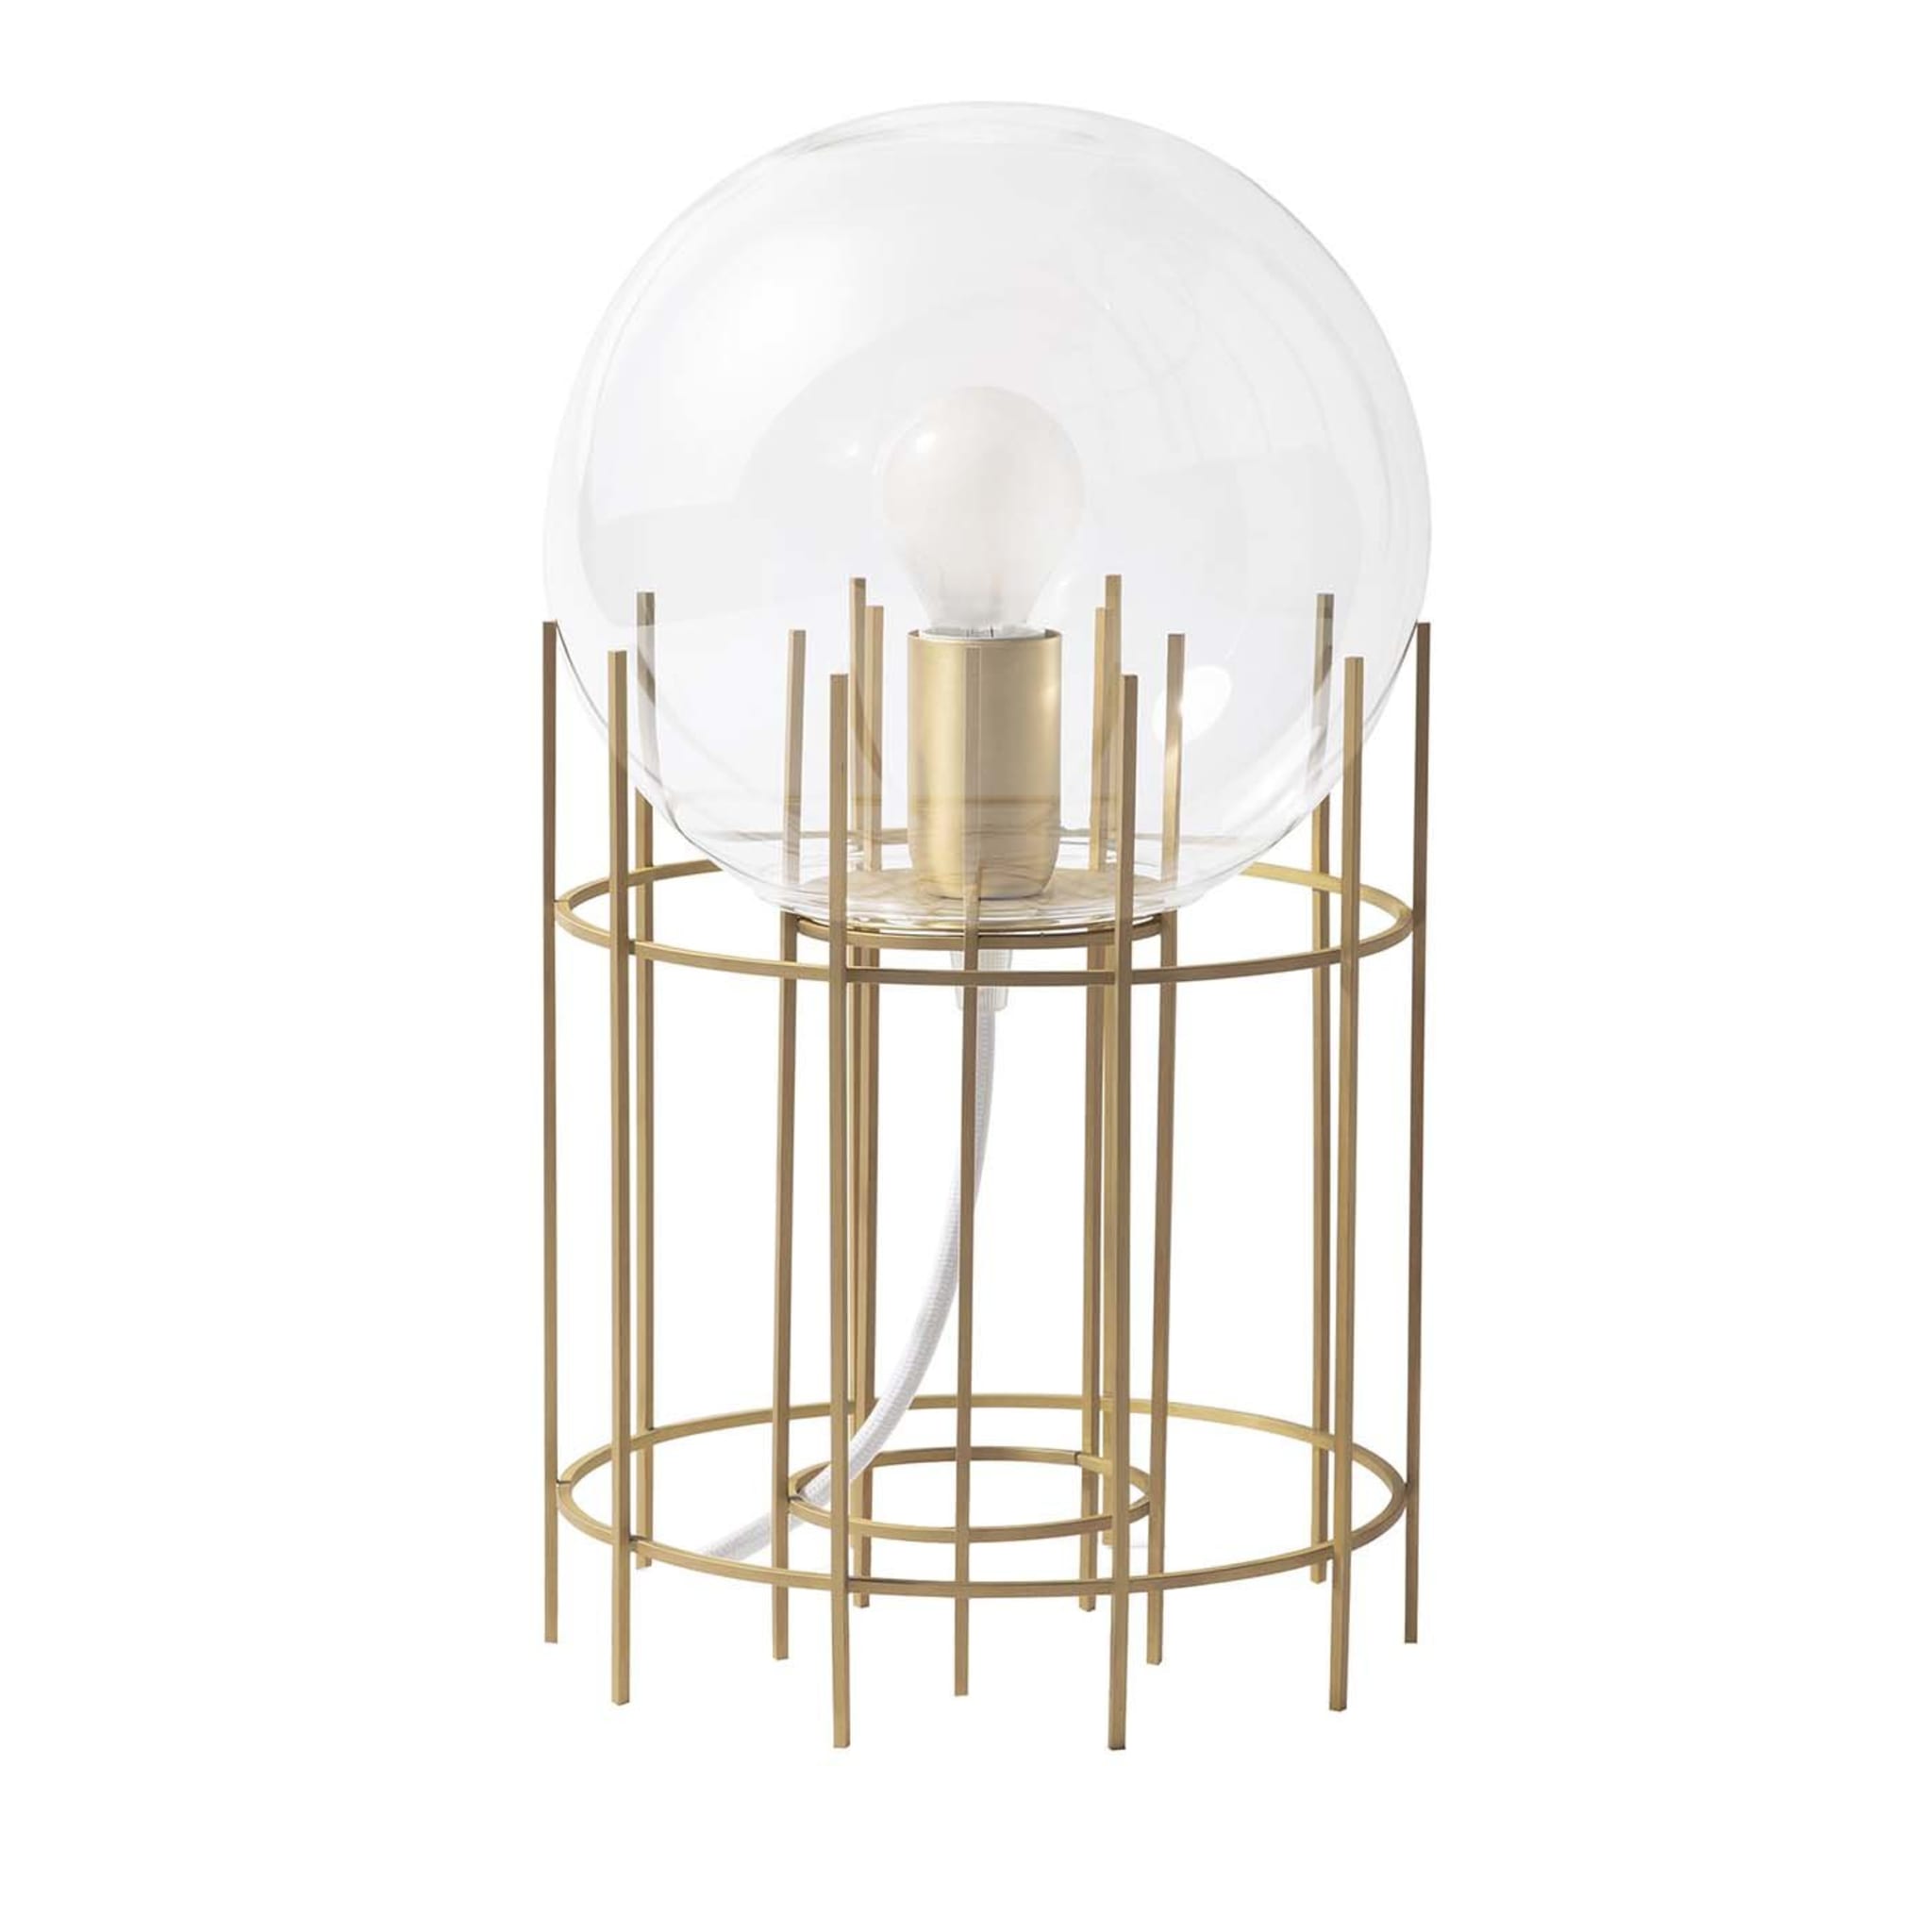 TPLG3 Satin Brass Table Lamp by GoodMorning studio - Main view